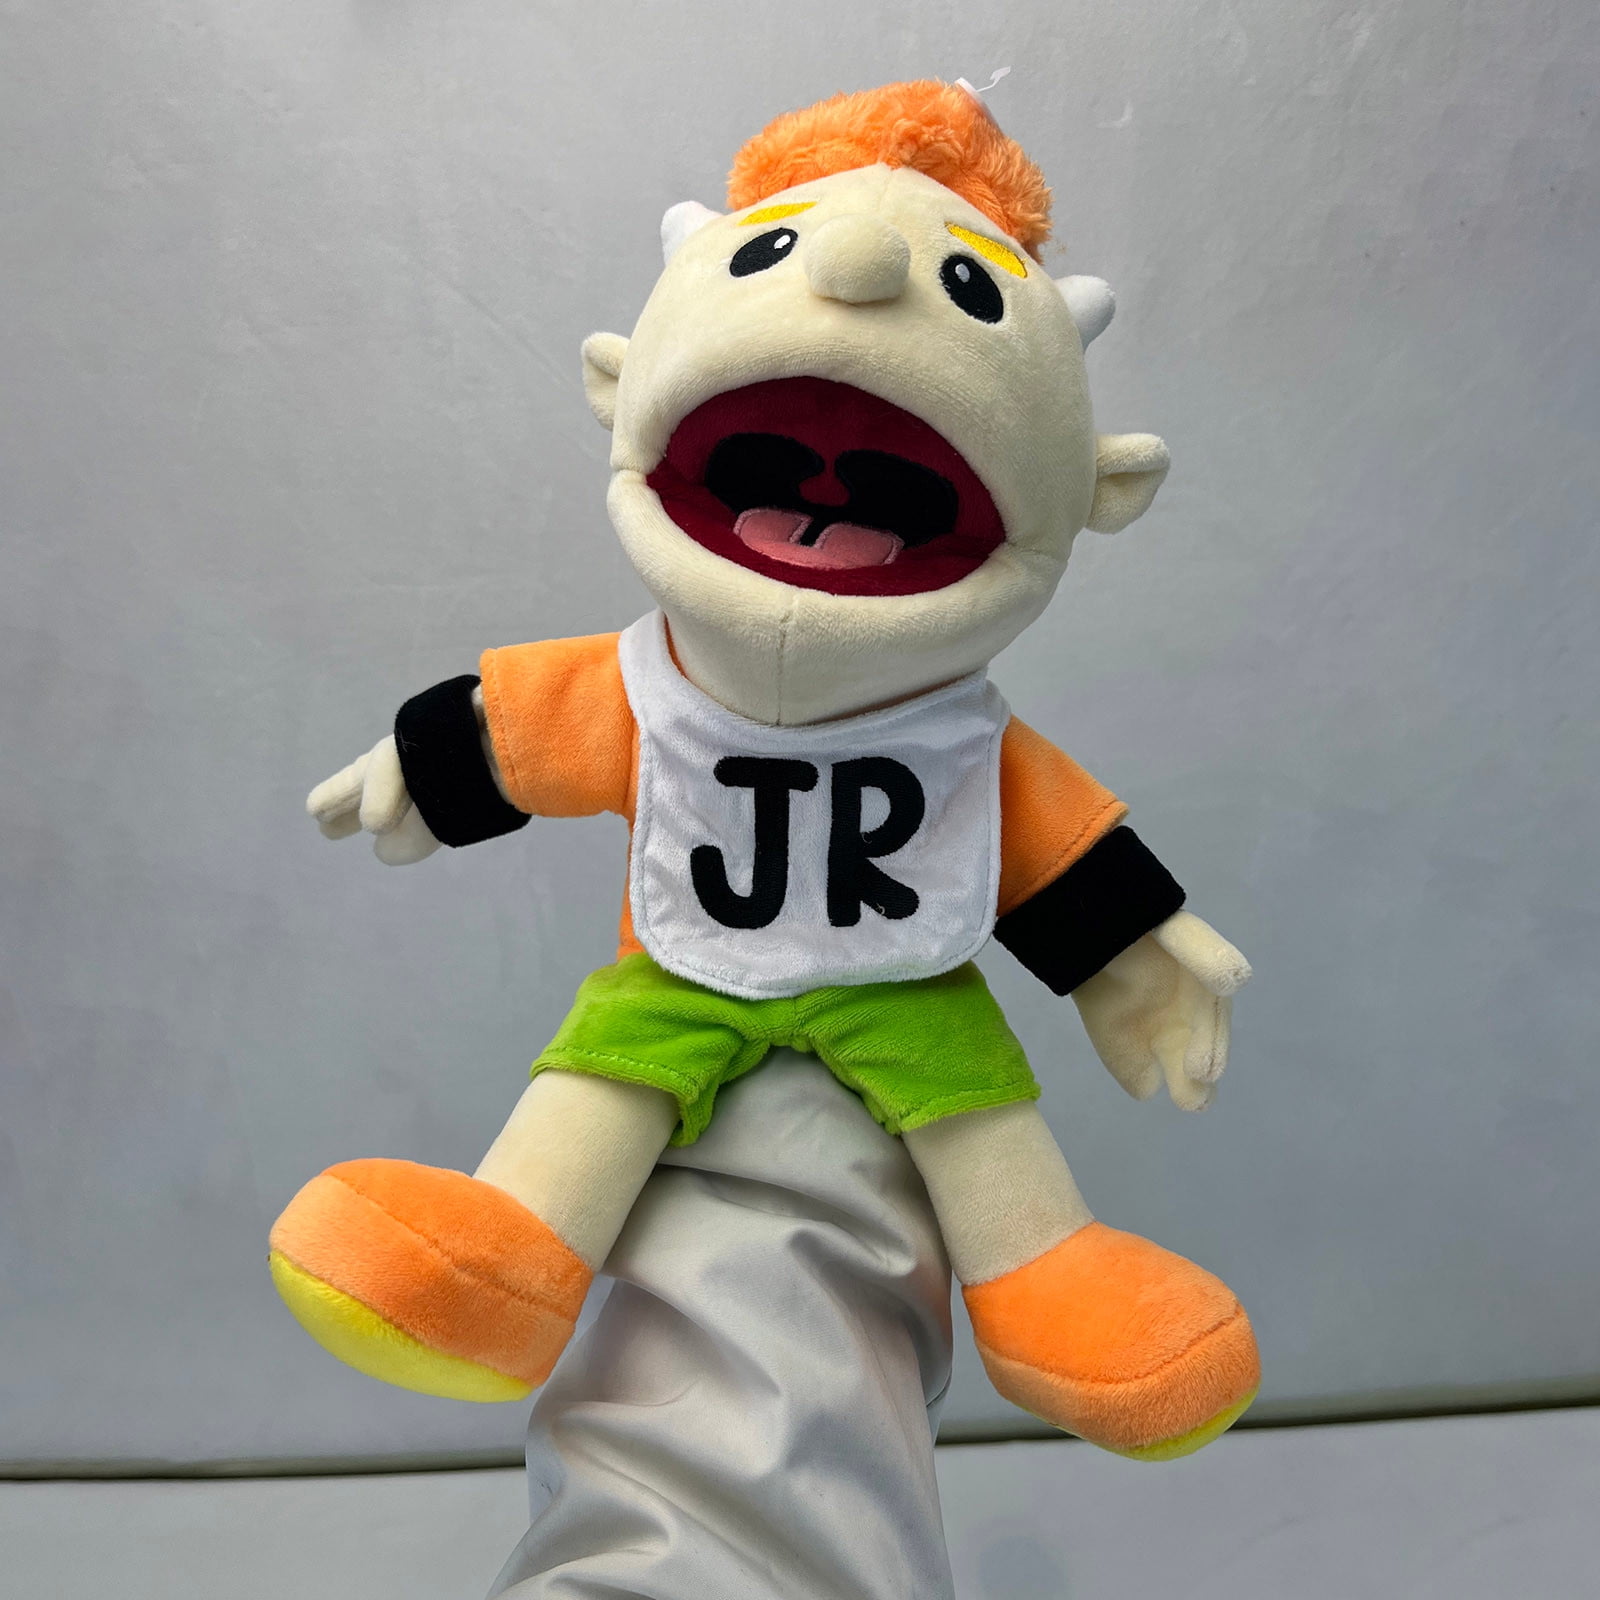 1* Jeffy Puppet Soft Plush Toy Hand Puppet for Play House Mischievous  Finger